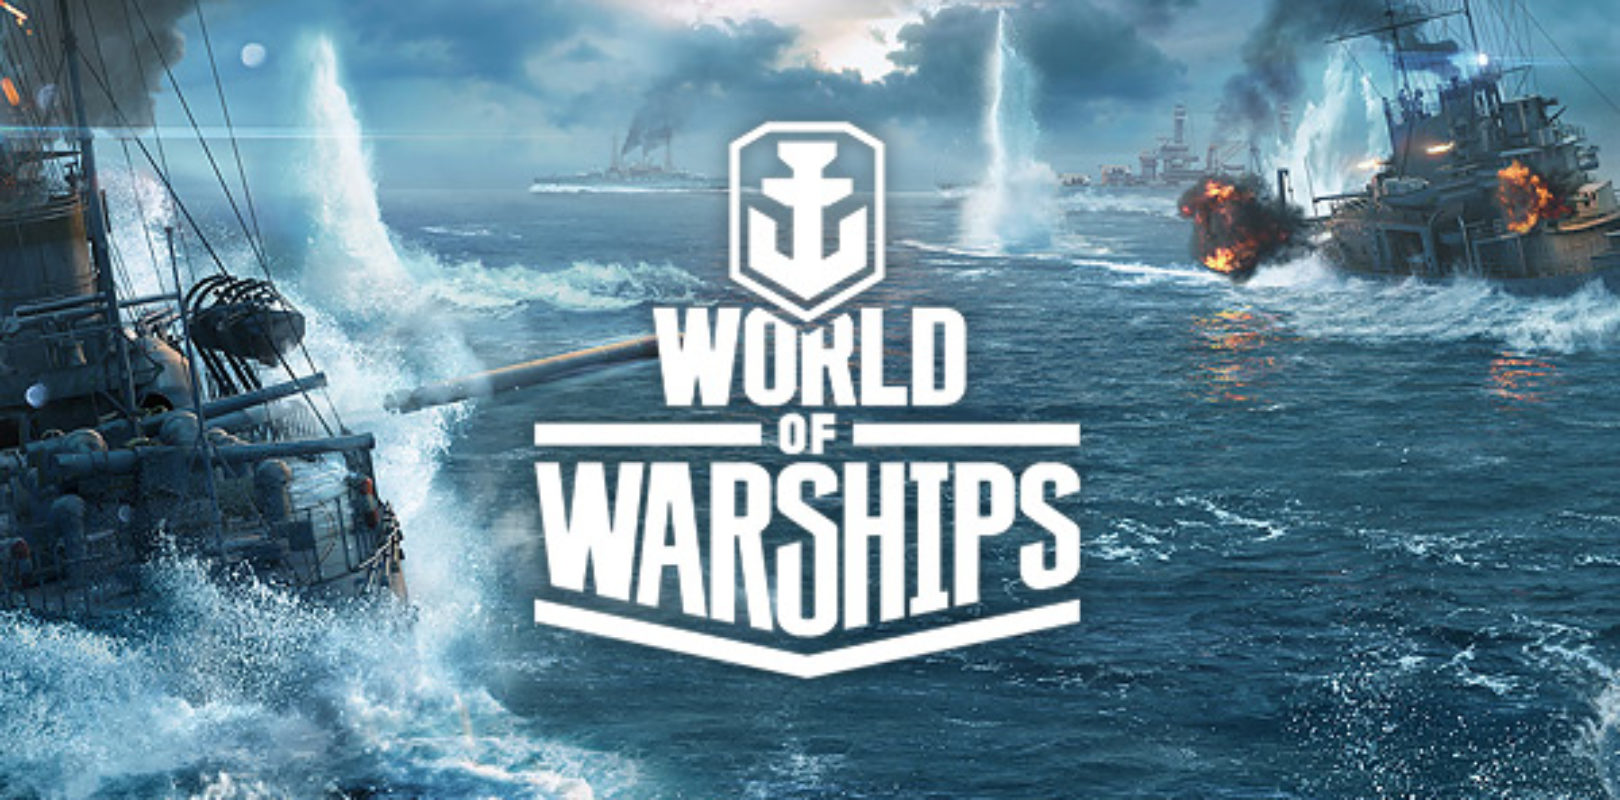 world of warships cc codes redeeming multiple